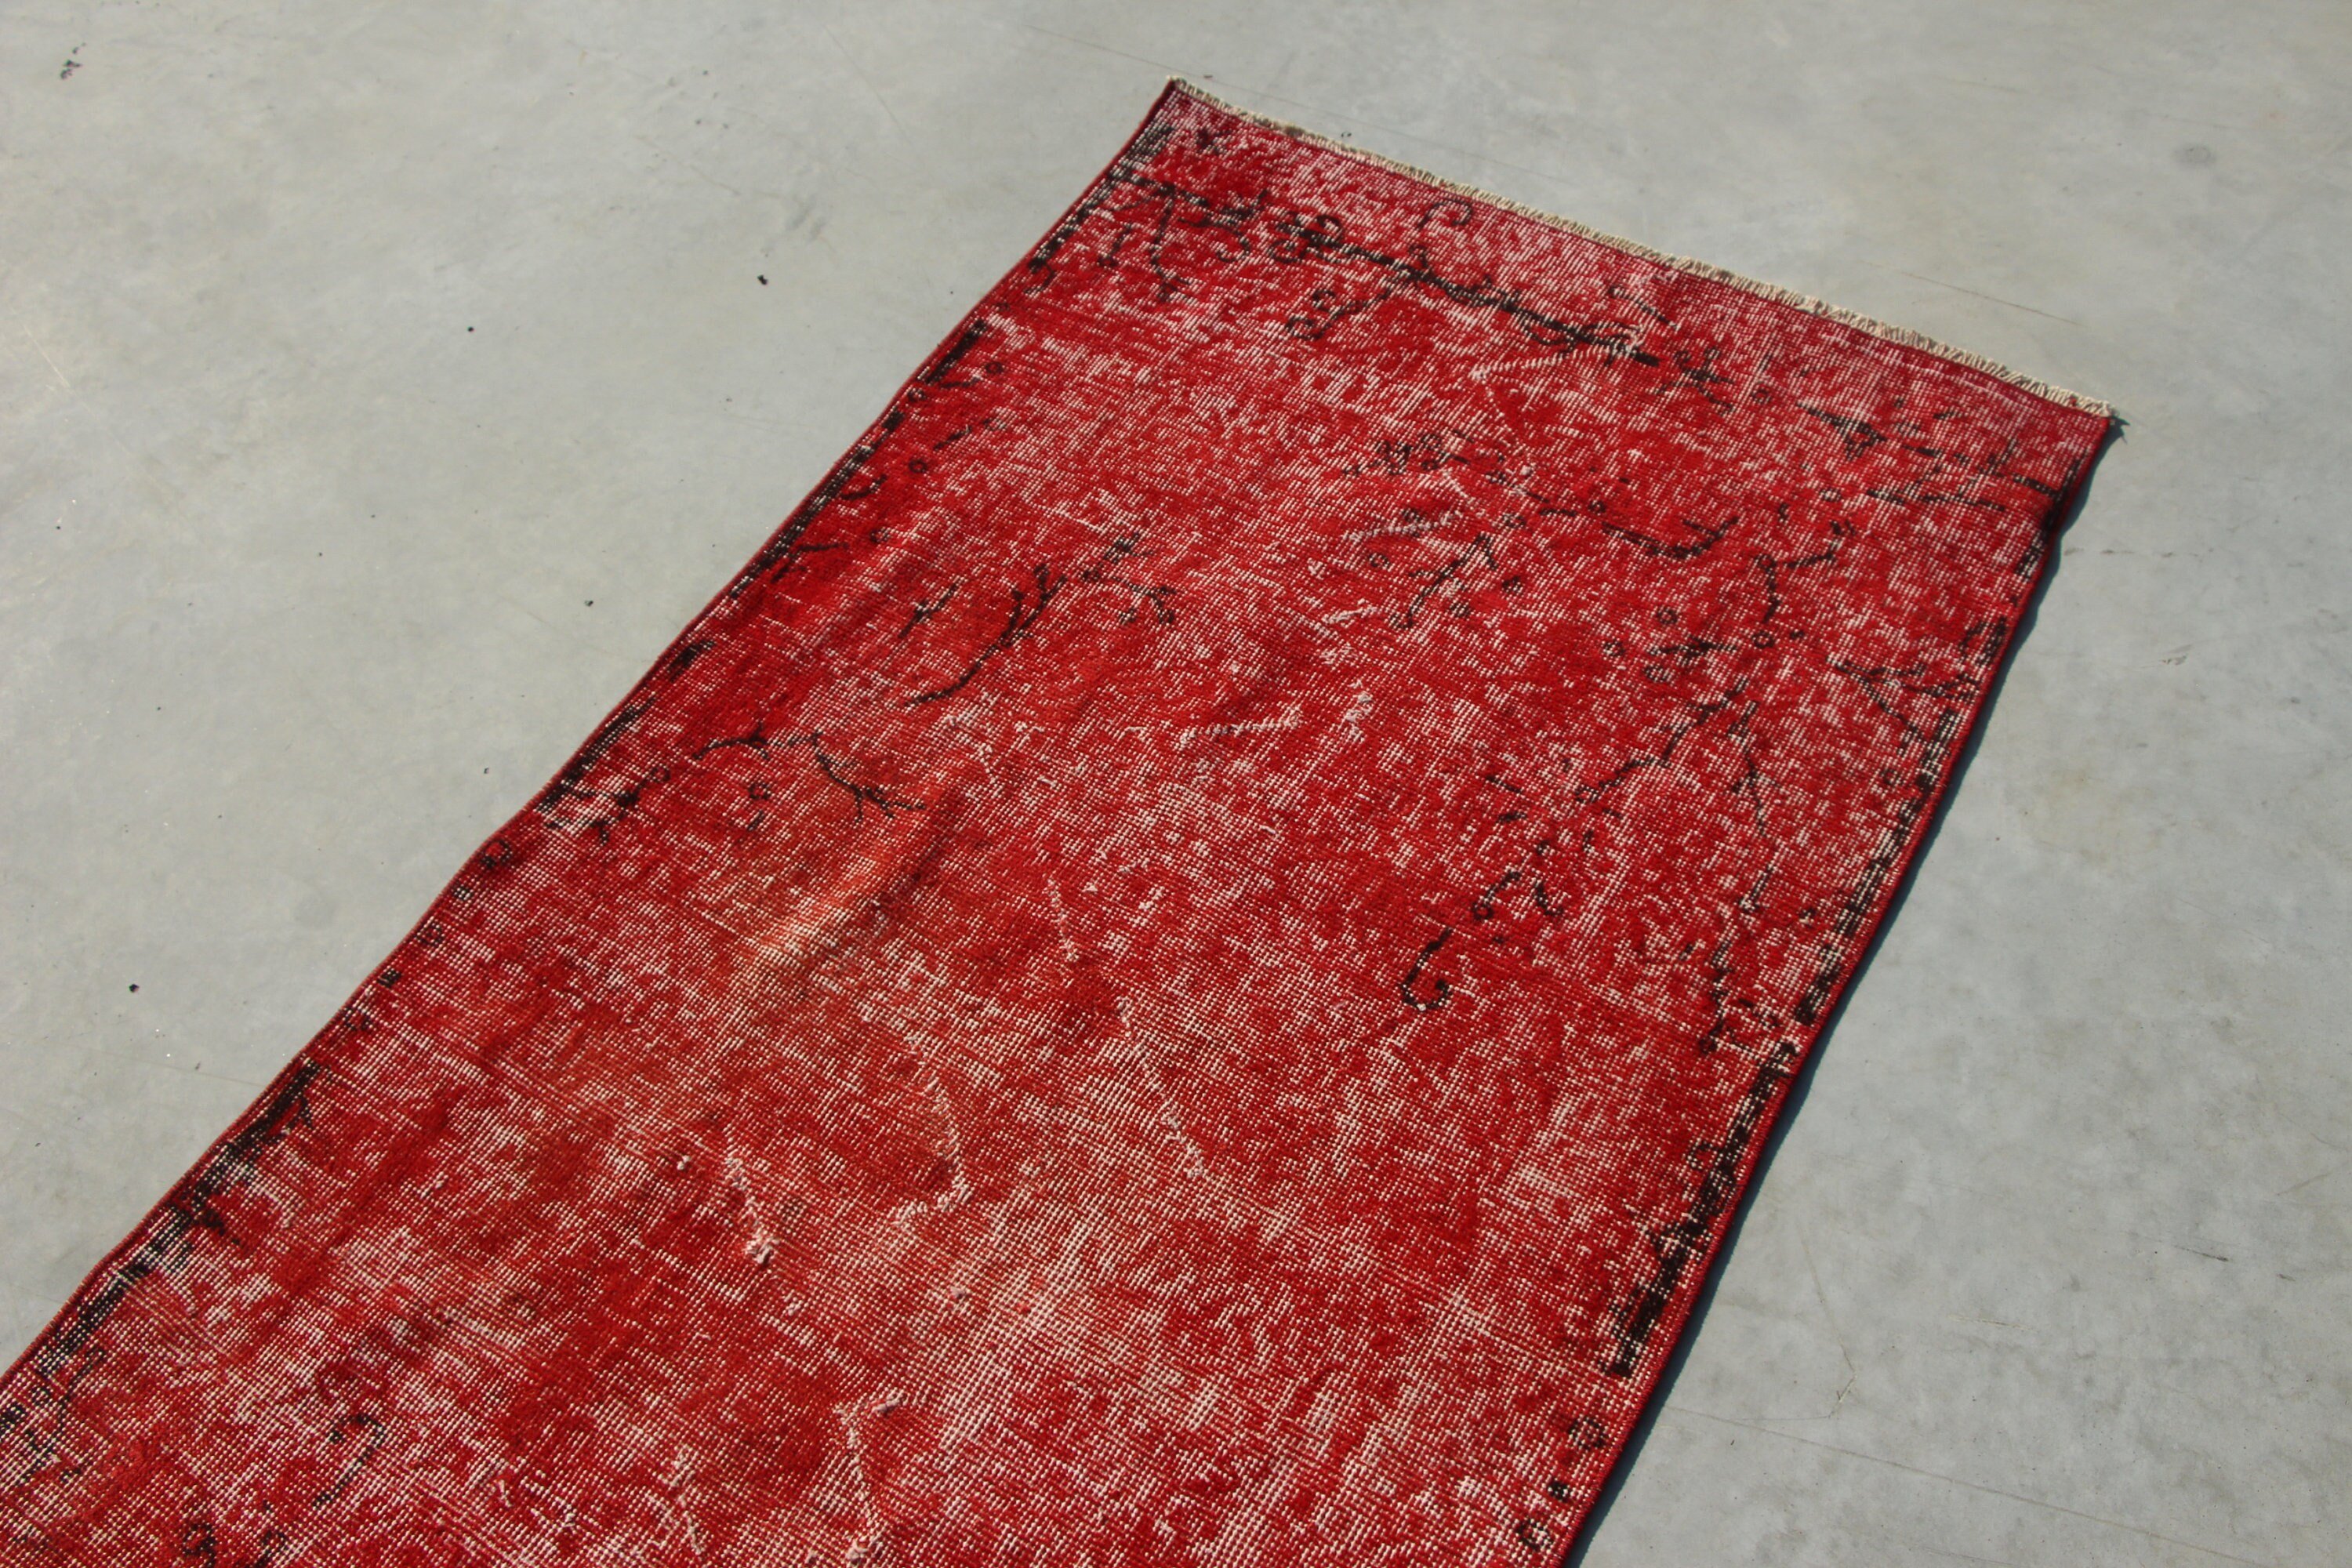 Moroccan Rug, Red Cool Rug, Abstract Rugs, Rugs for Bedroom, Kitchen Rugs, Nursery Rugs, Turkish Rug, Vintage Rugs, 2.9x6.7 ft Accent Rugs